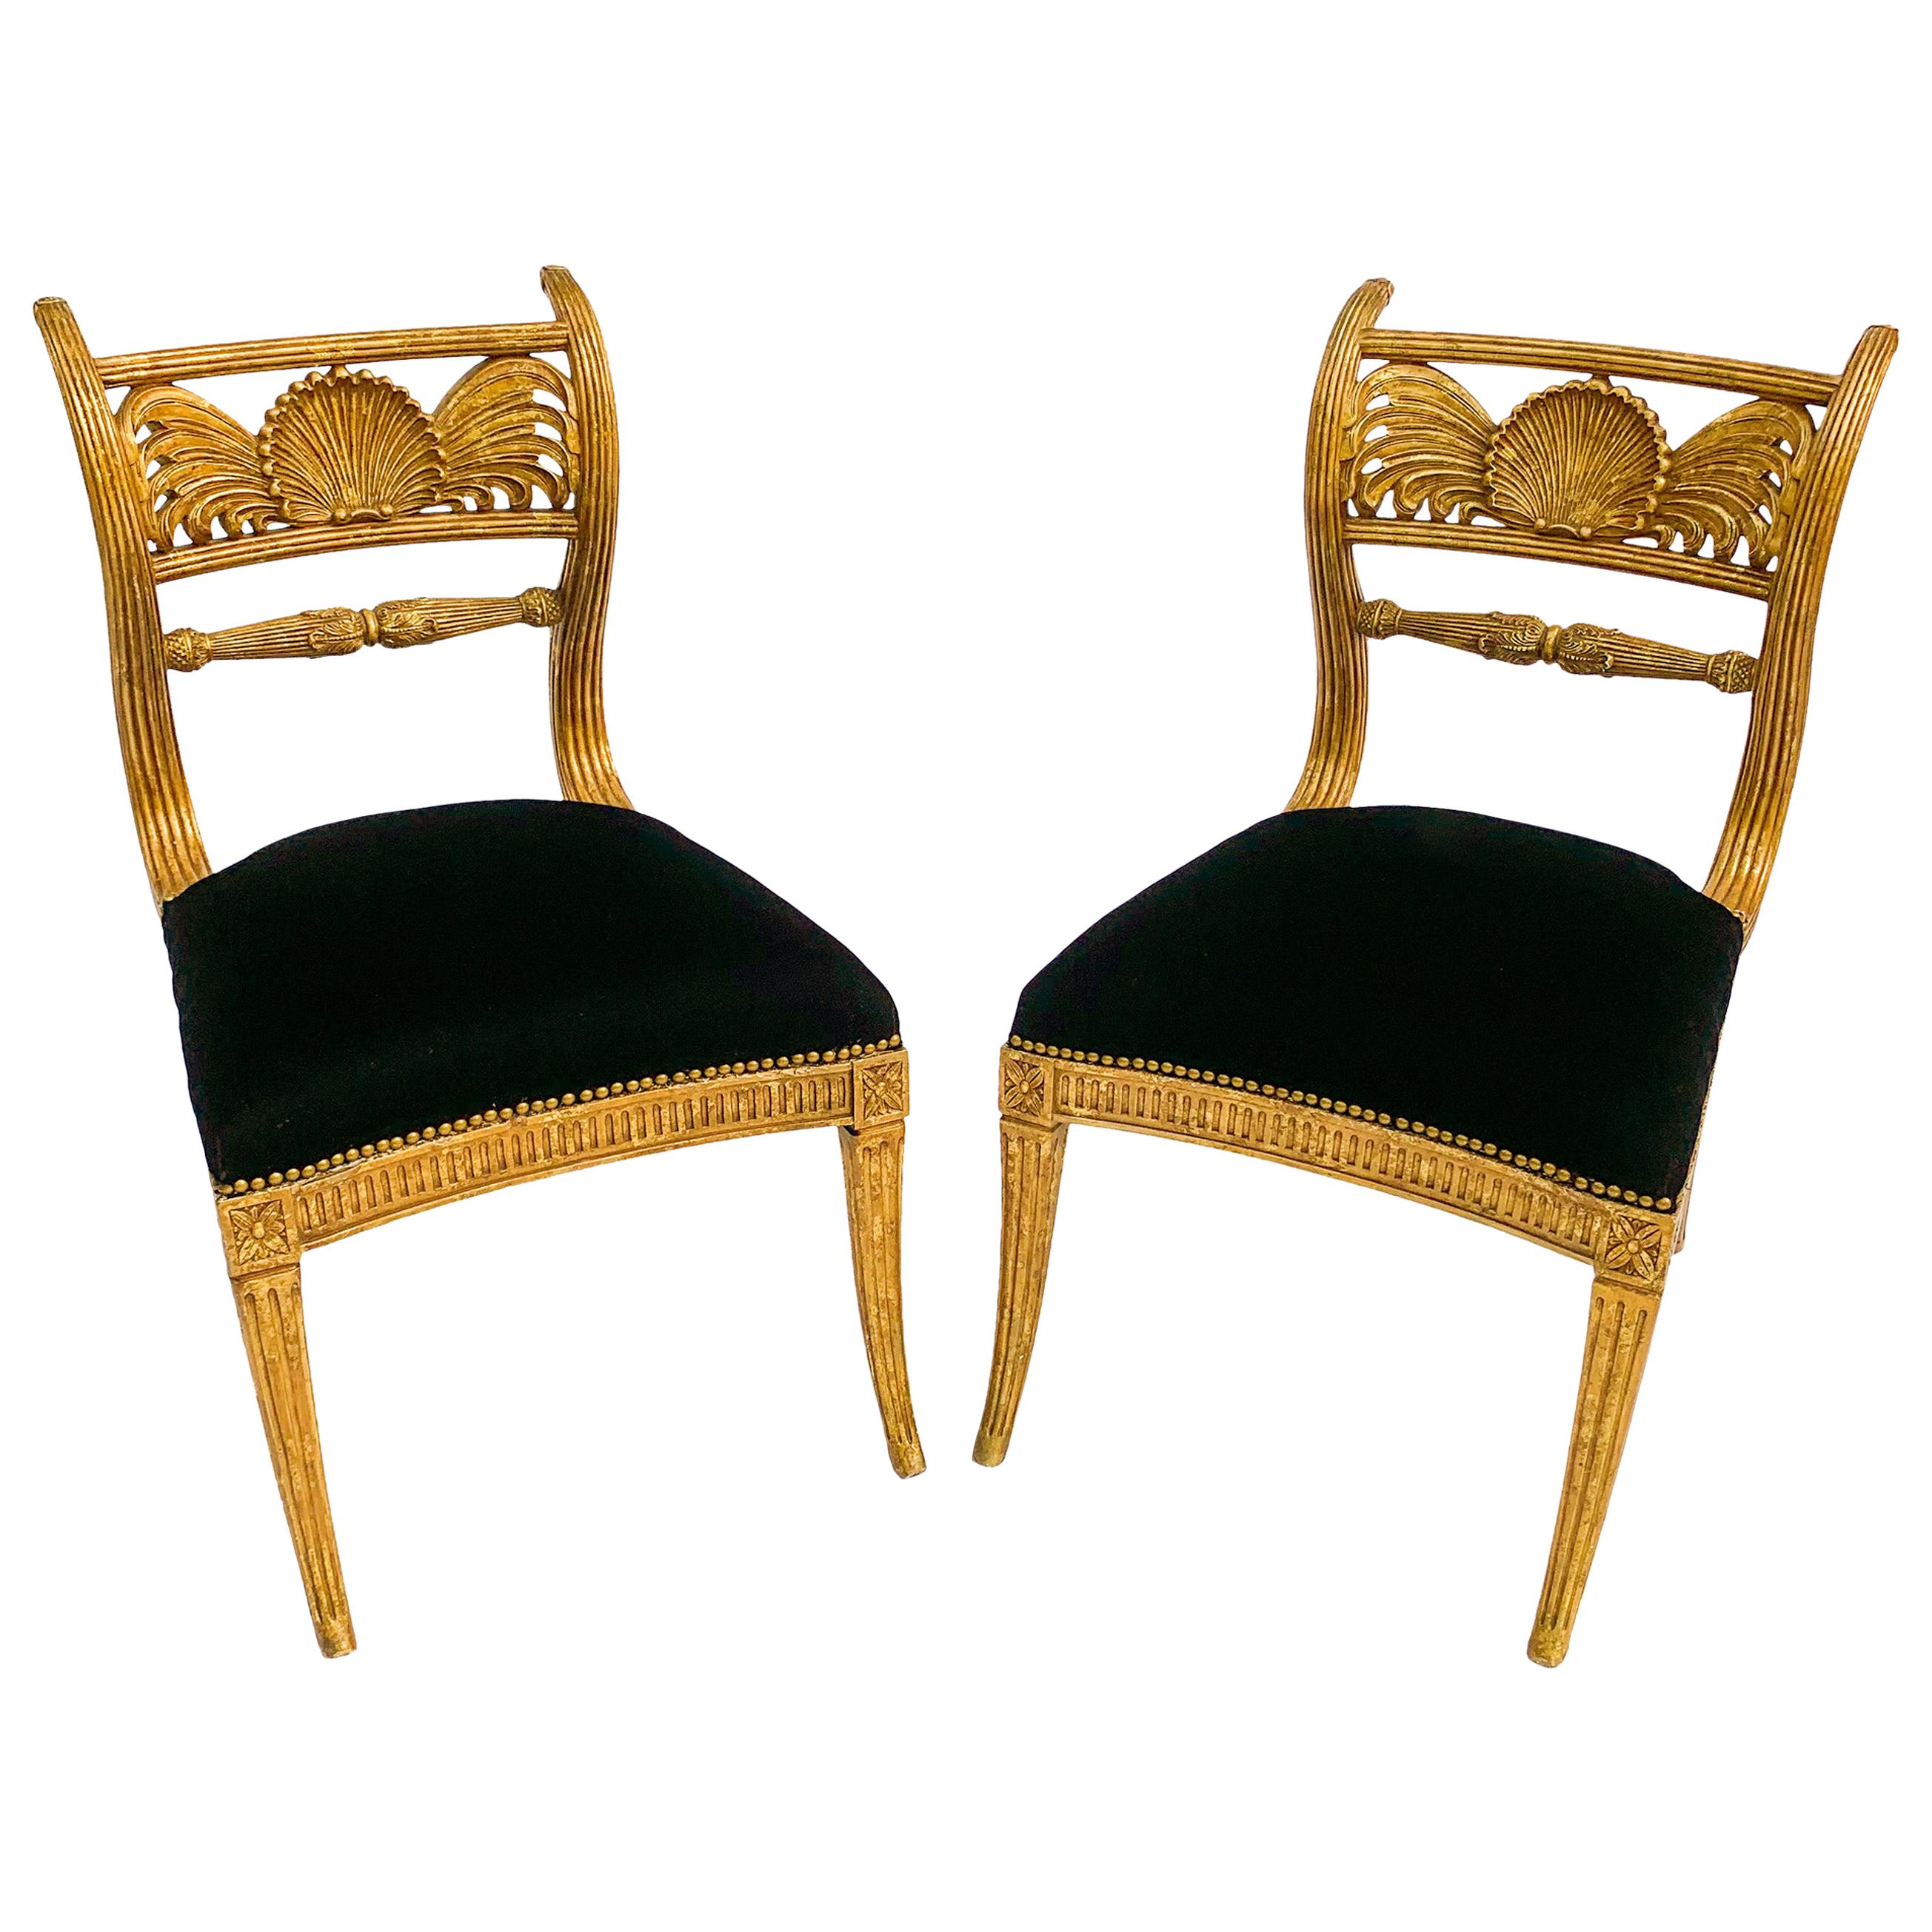 Pair of 20th Century Gilded Regency Style Side Chairs by Maitland Smith